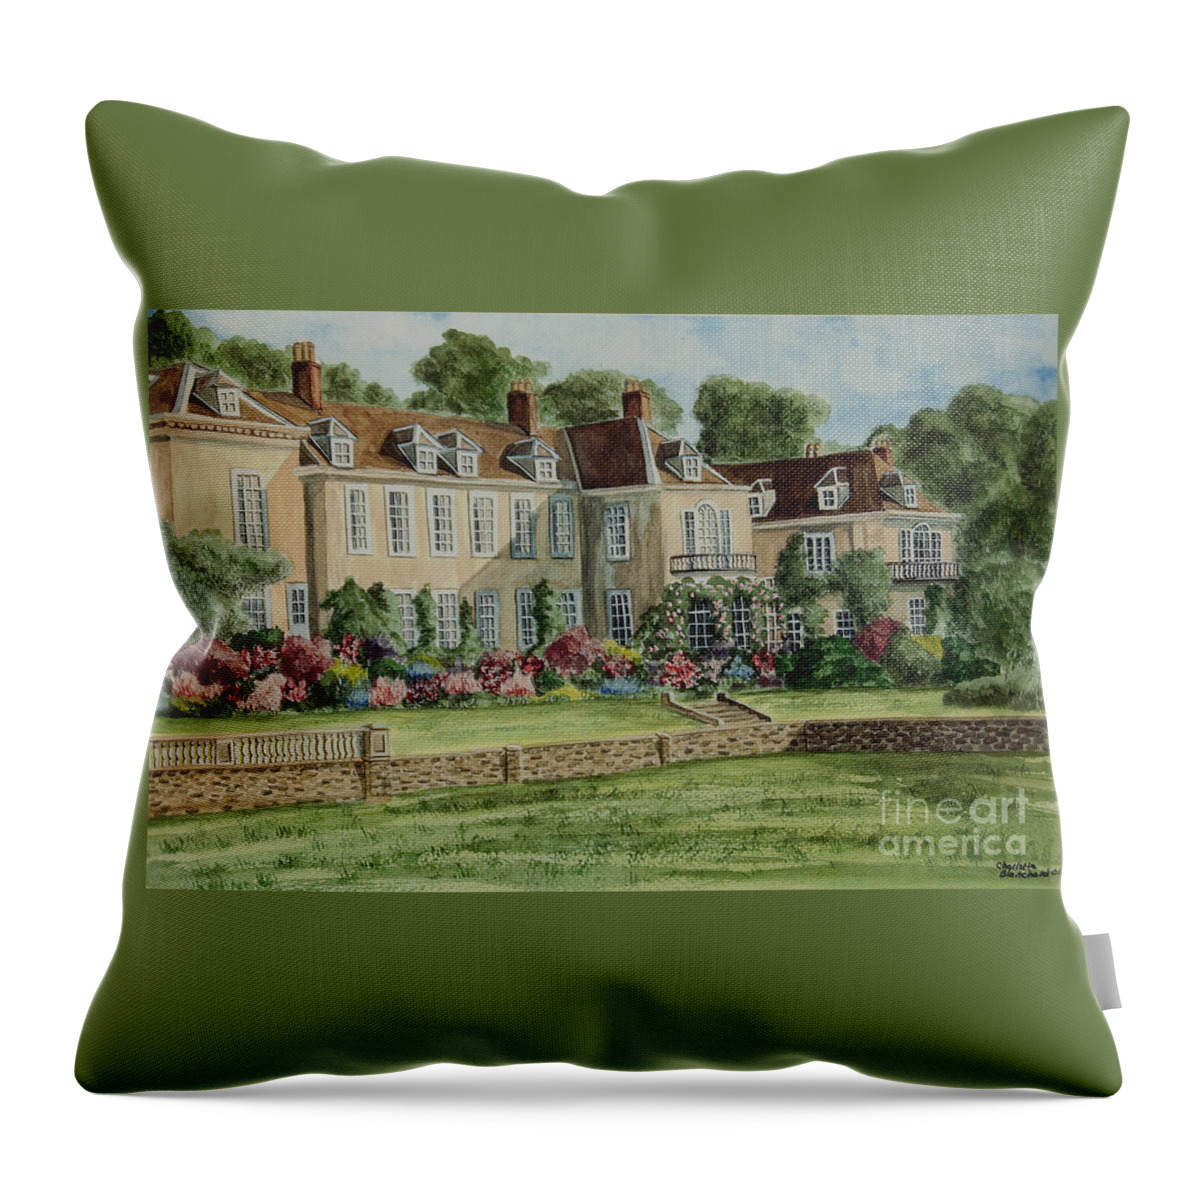 England Throw Pillow featuring the painting Firle Place England by Charlotte Blanchard